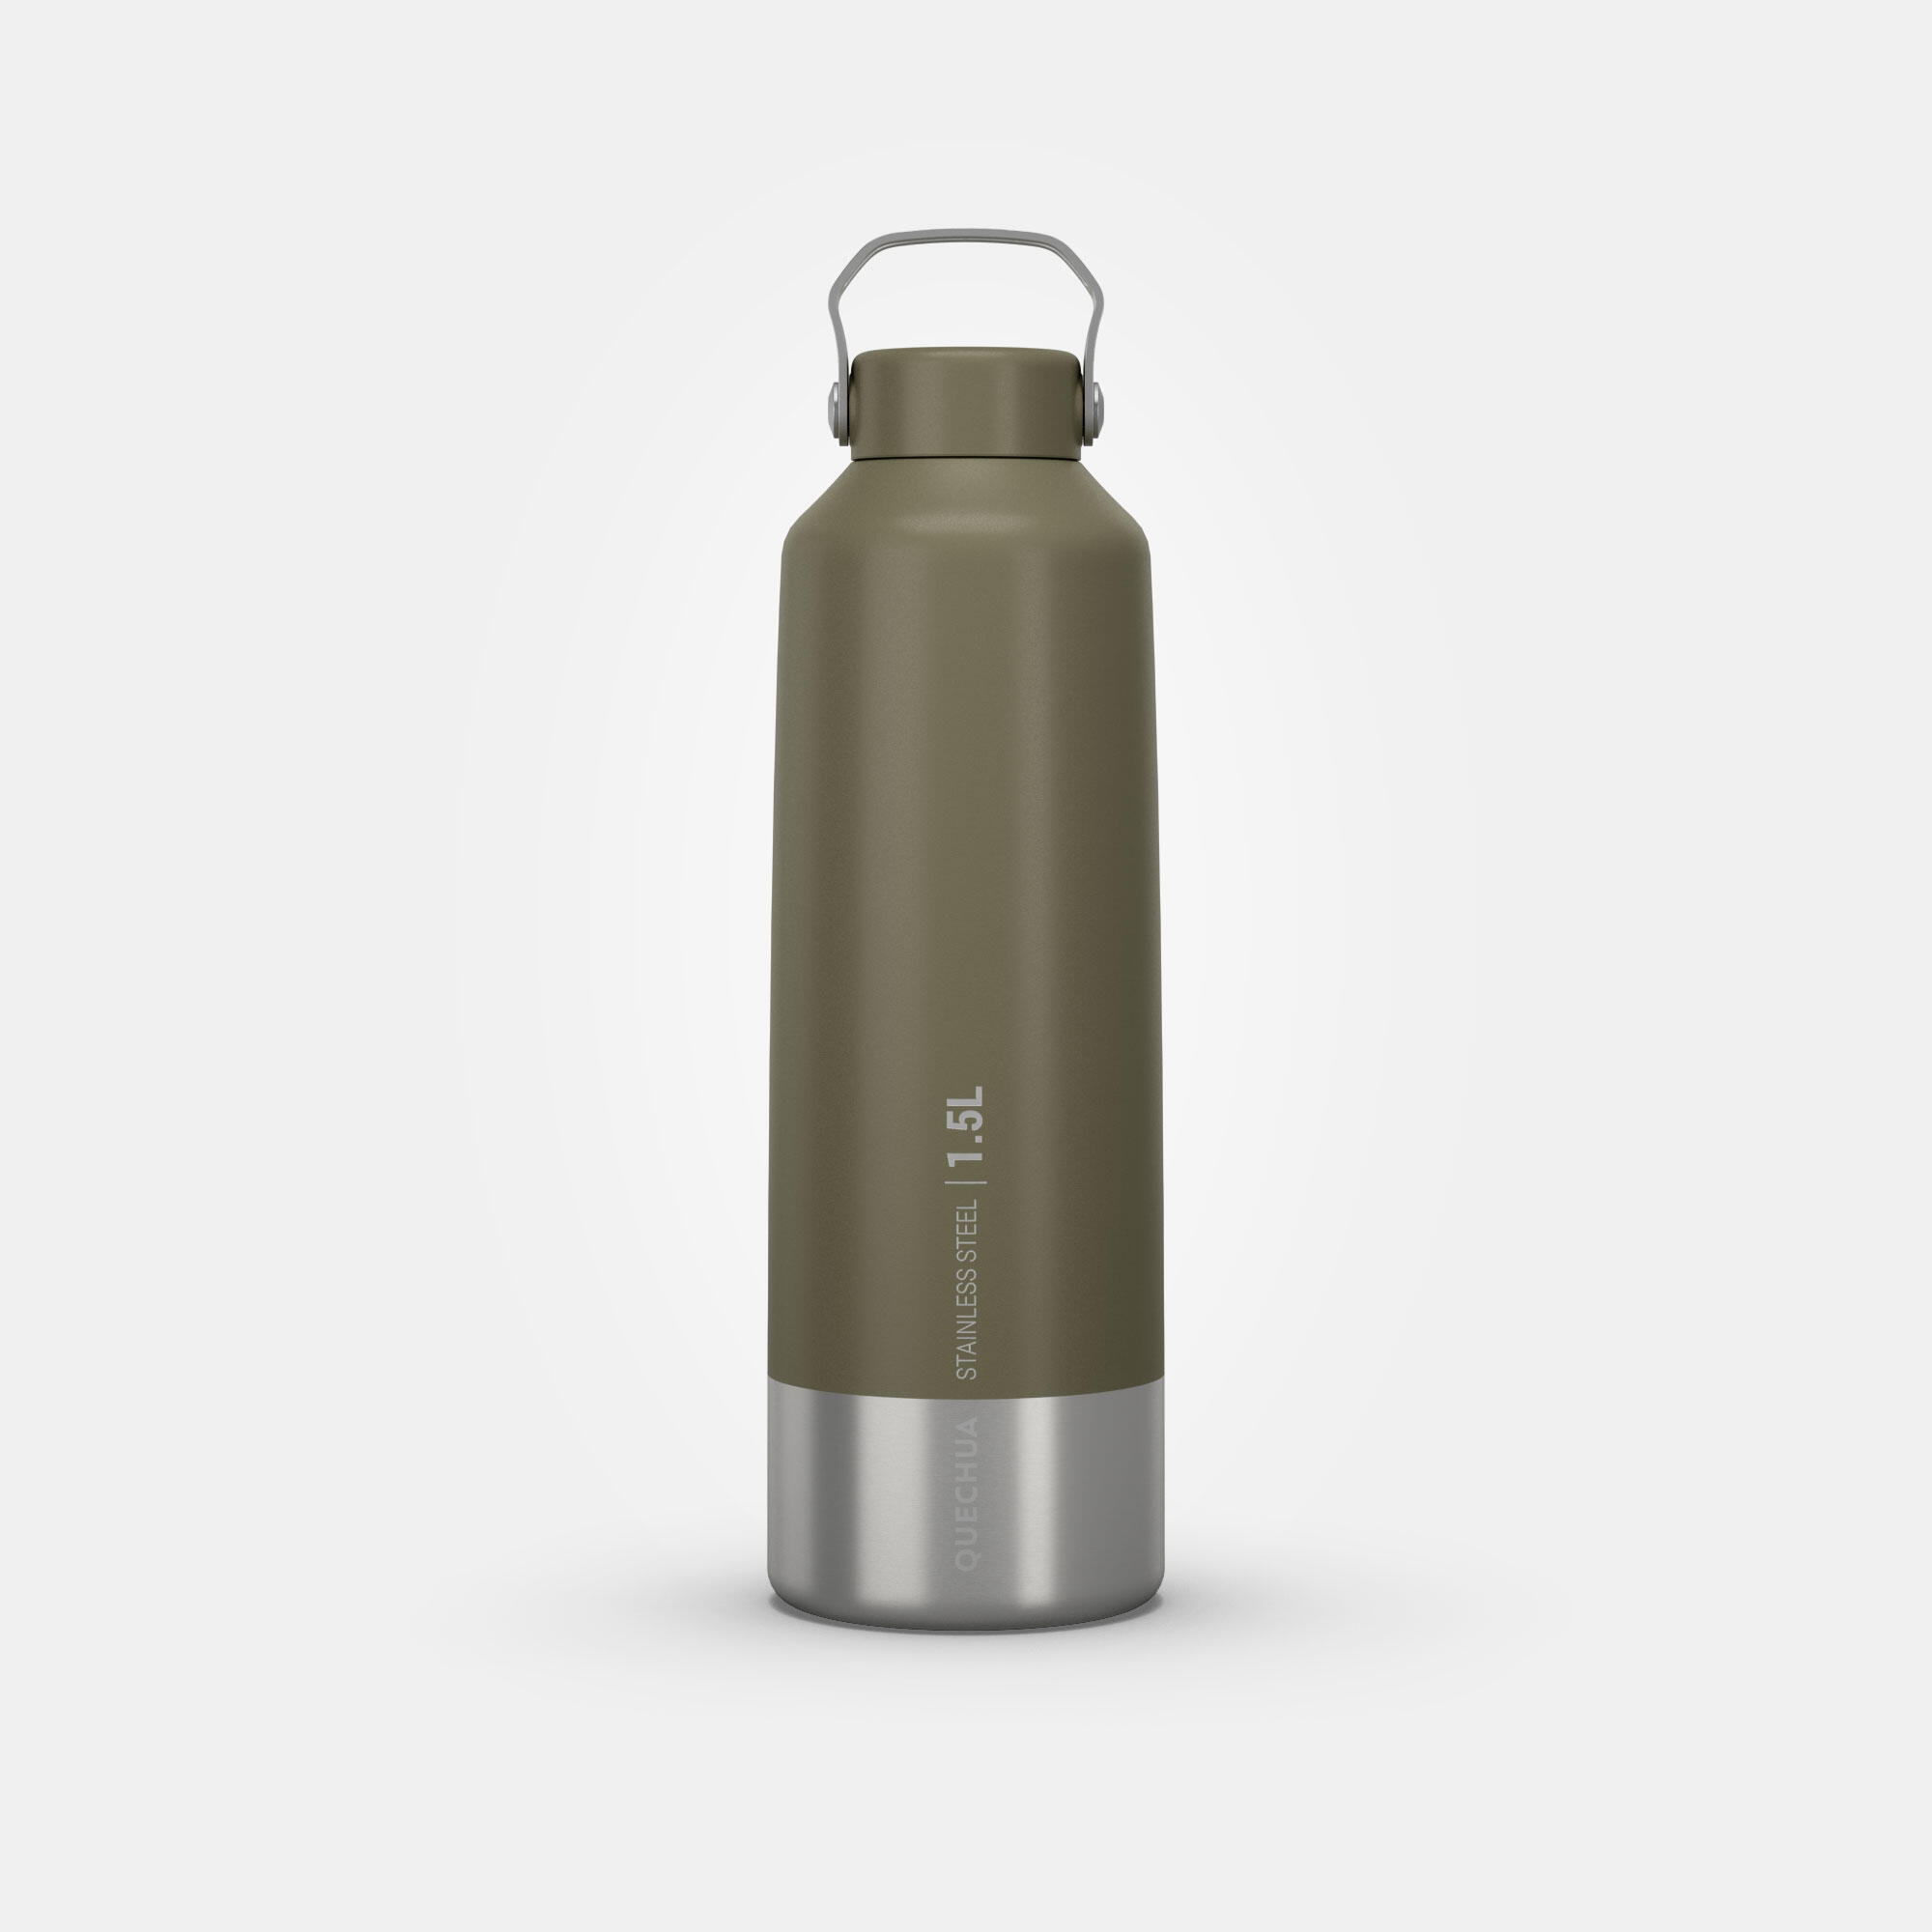 MH 100 Stainless Steel Bottle 1.5 L - QUECHUA